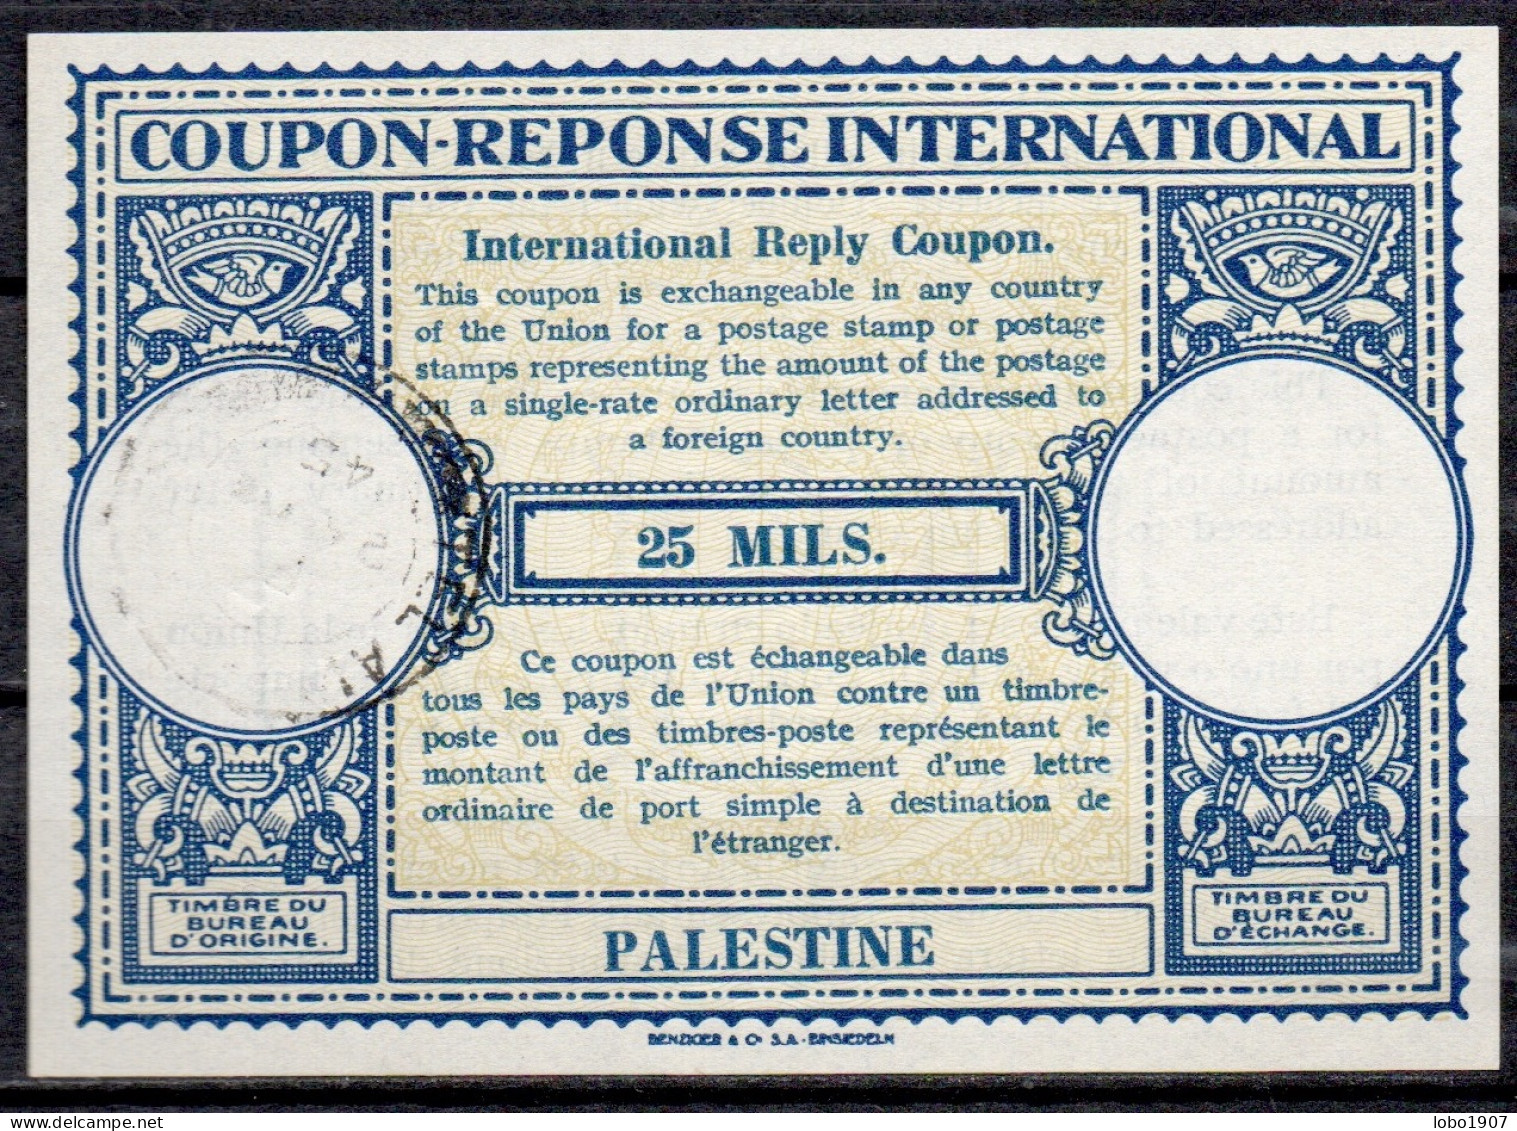 PALESTINE 1945  Lo12pr  25 MILS.  Early International Reply Coupon Reponse Antwortschein IRC IAS   T.A. EXPRESS 25.12.45 - Palestine